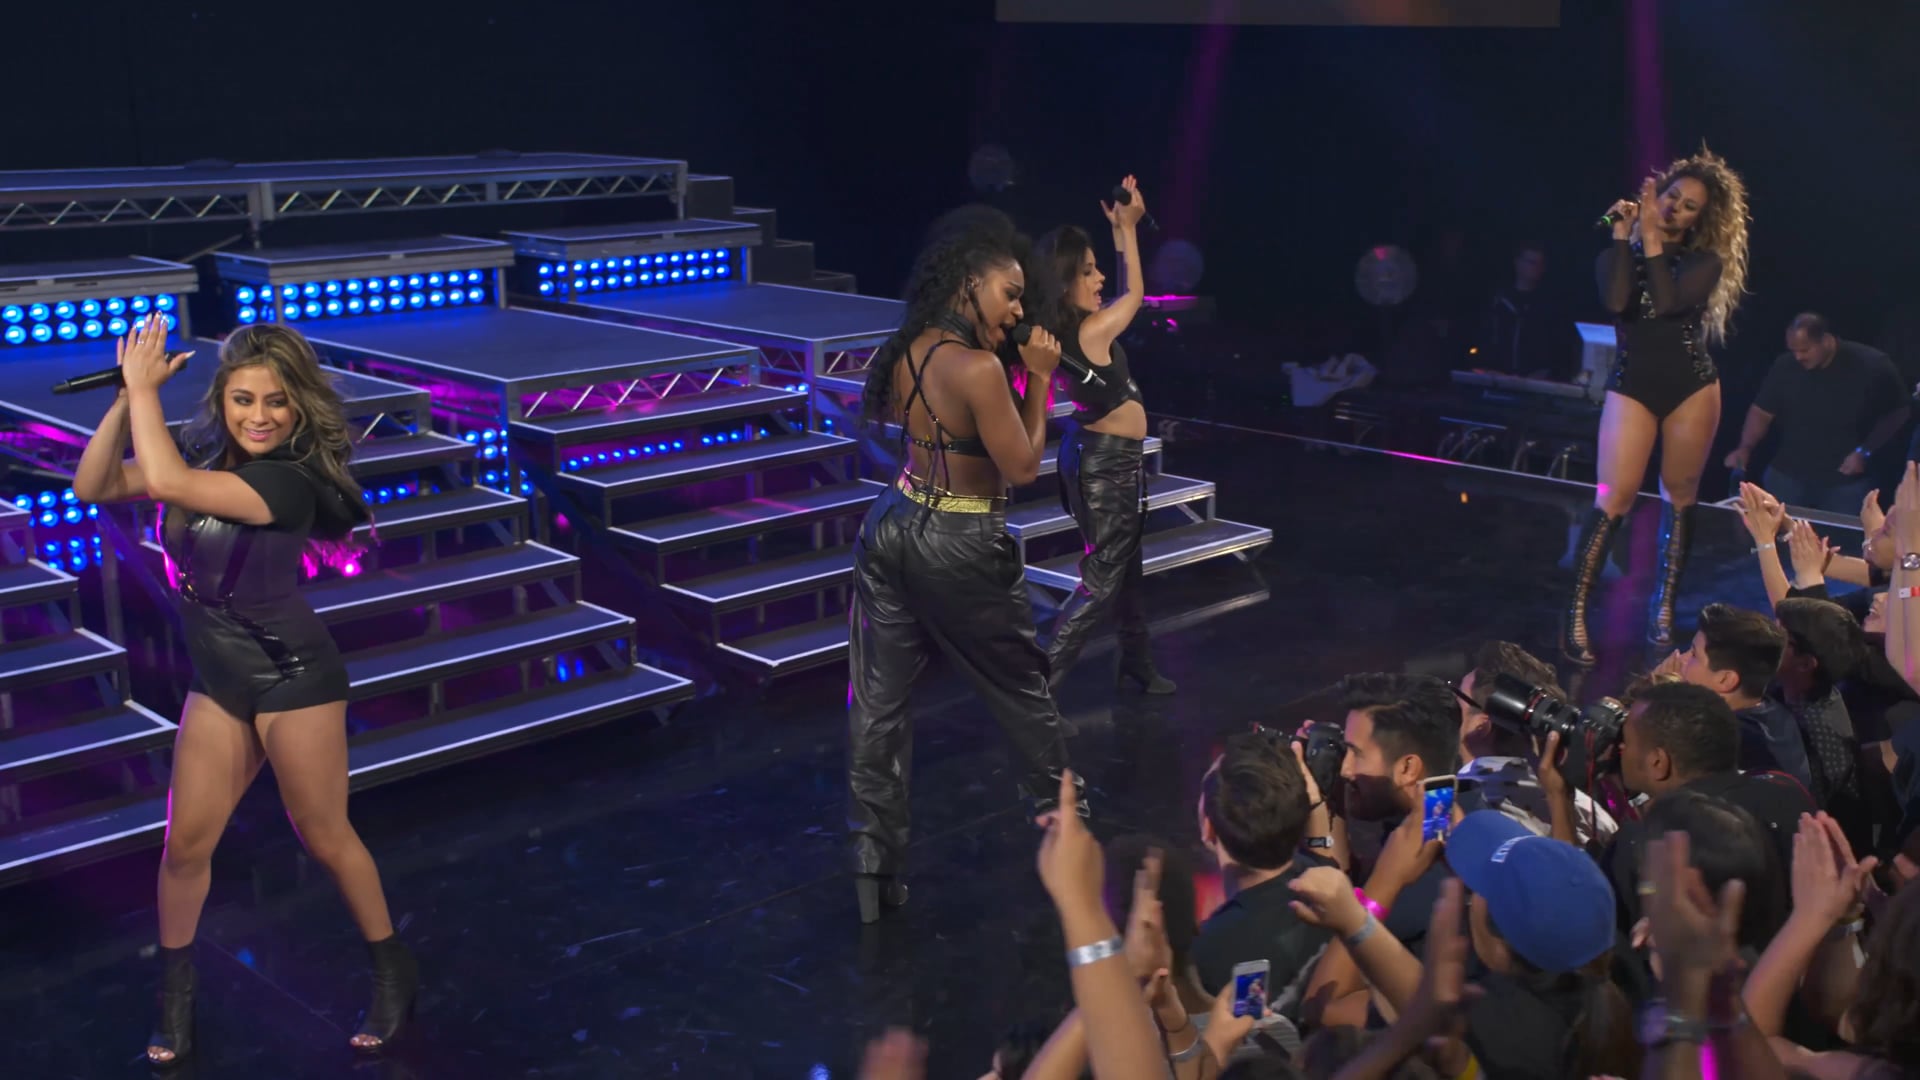 Fifth Harmony - Worth It (Live on the Honda Stage at the iHeartRadio Theater LA)